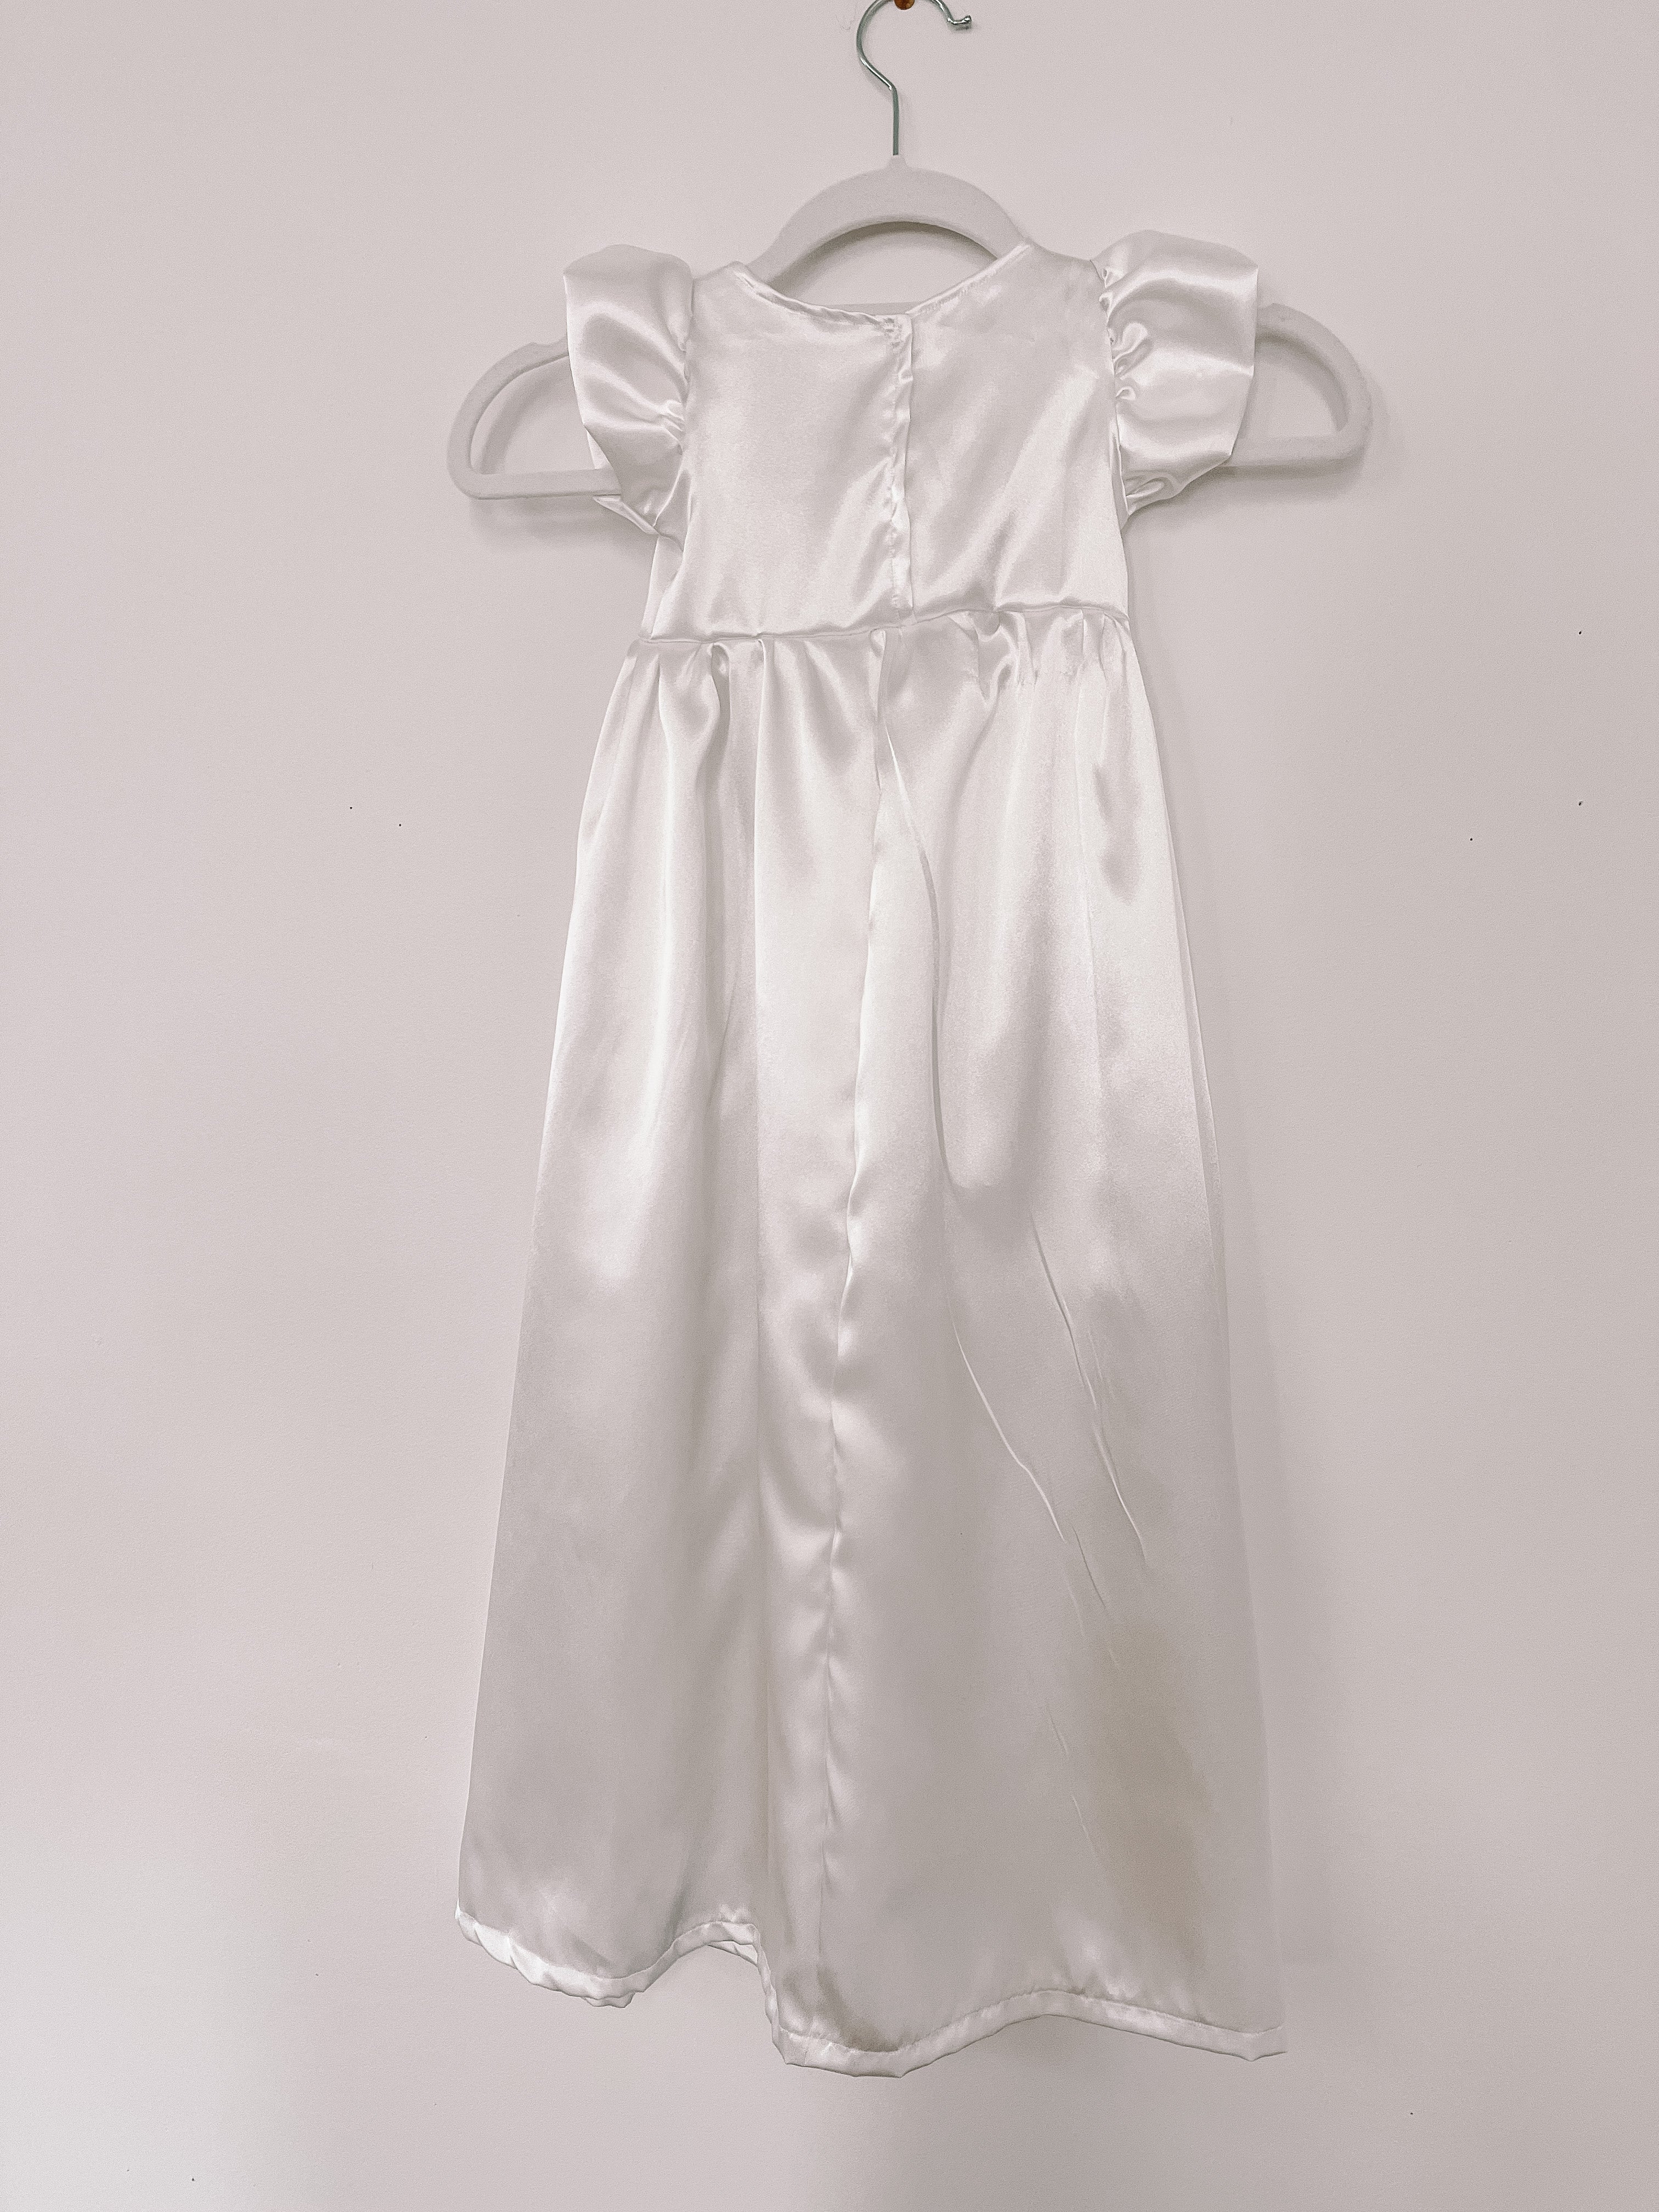 Satin Rufflesleeve Blessing Gown